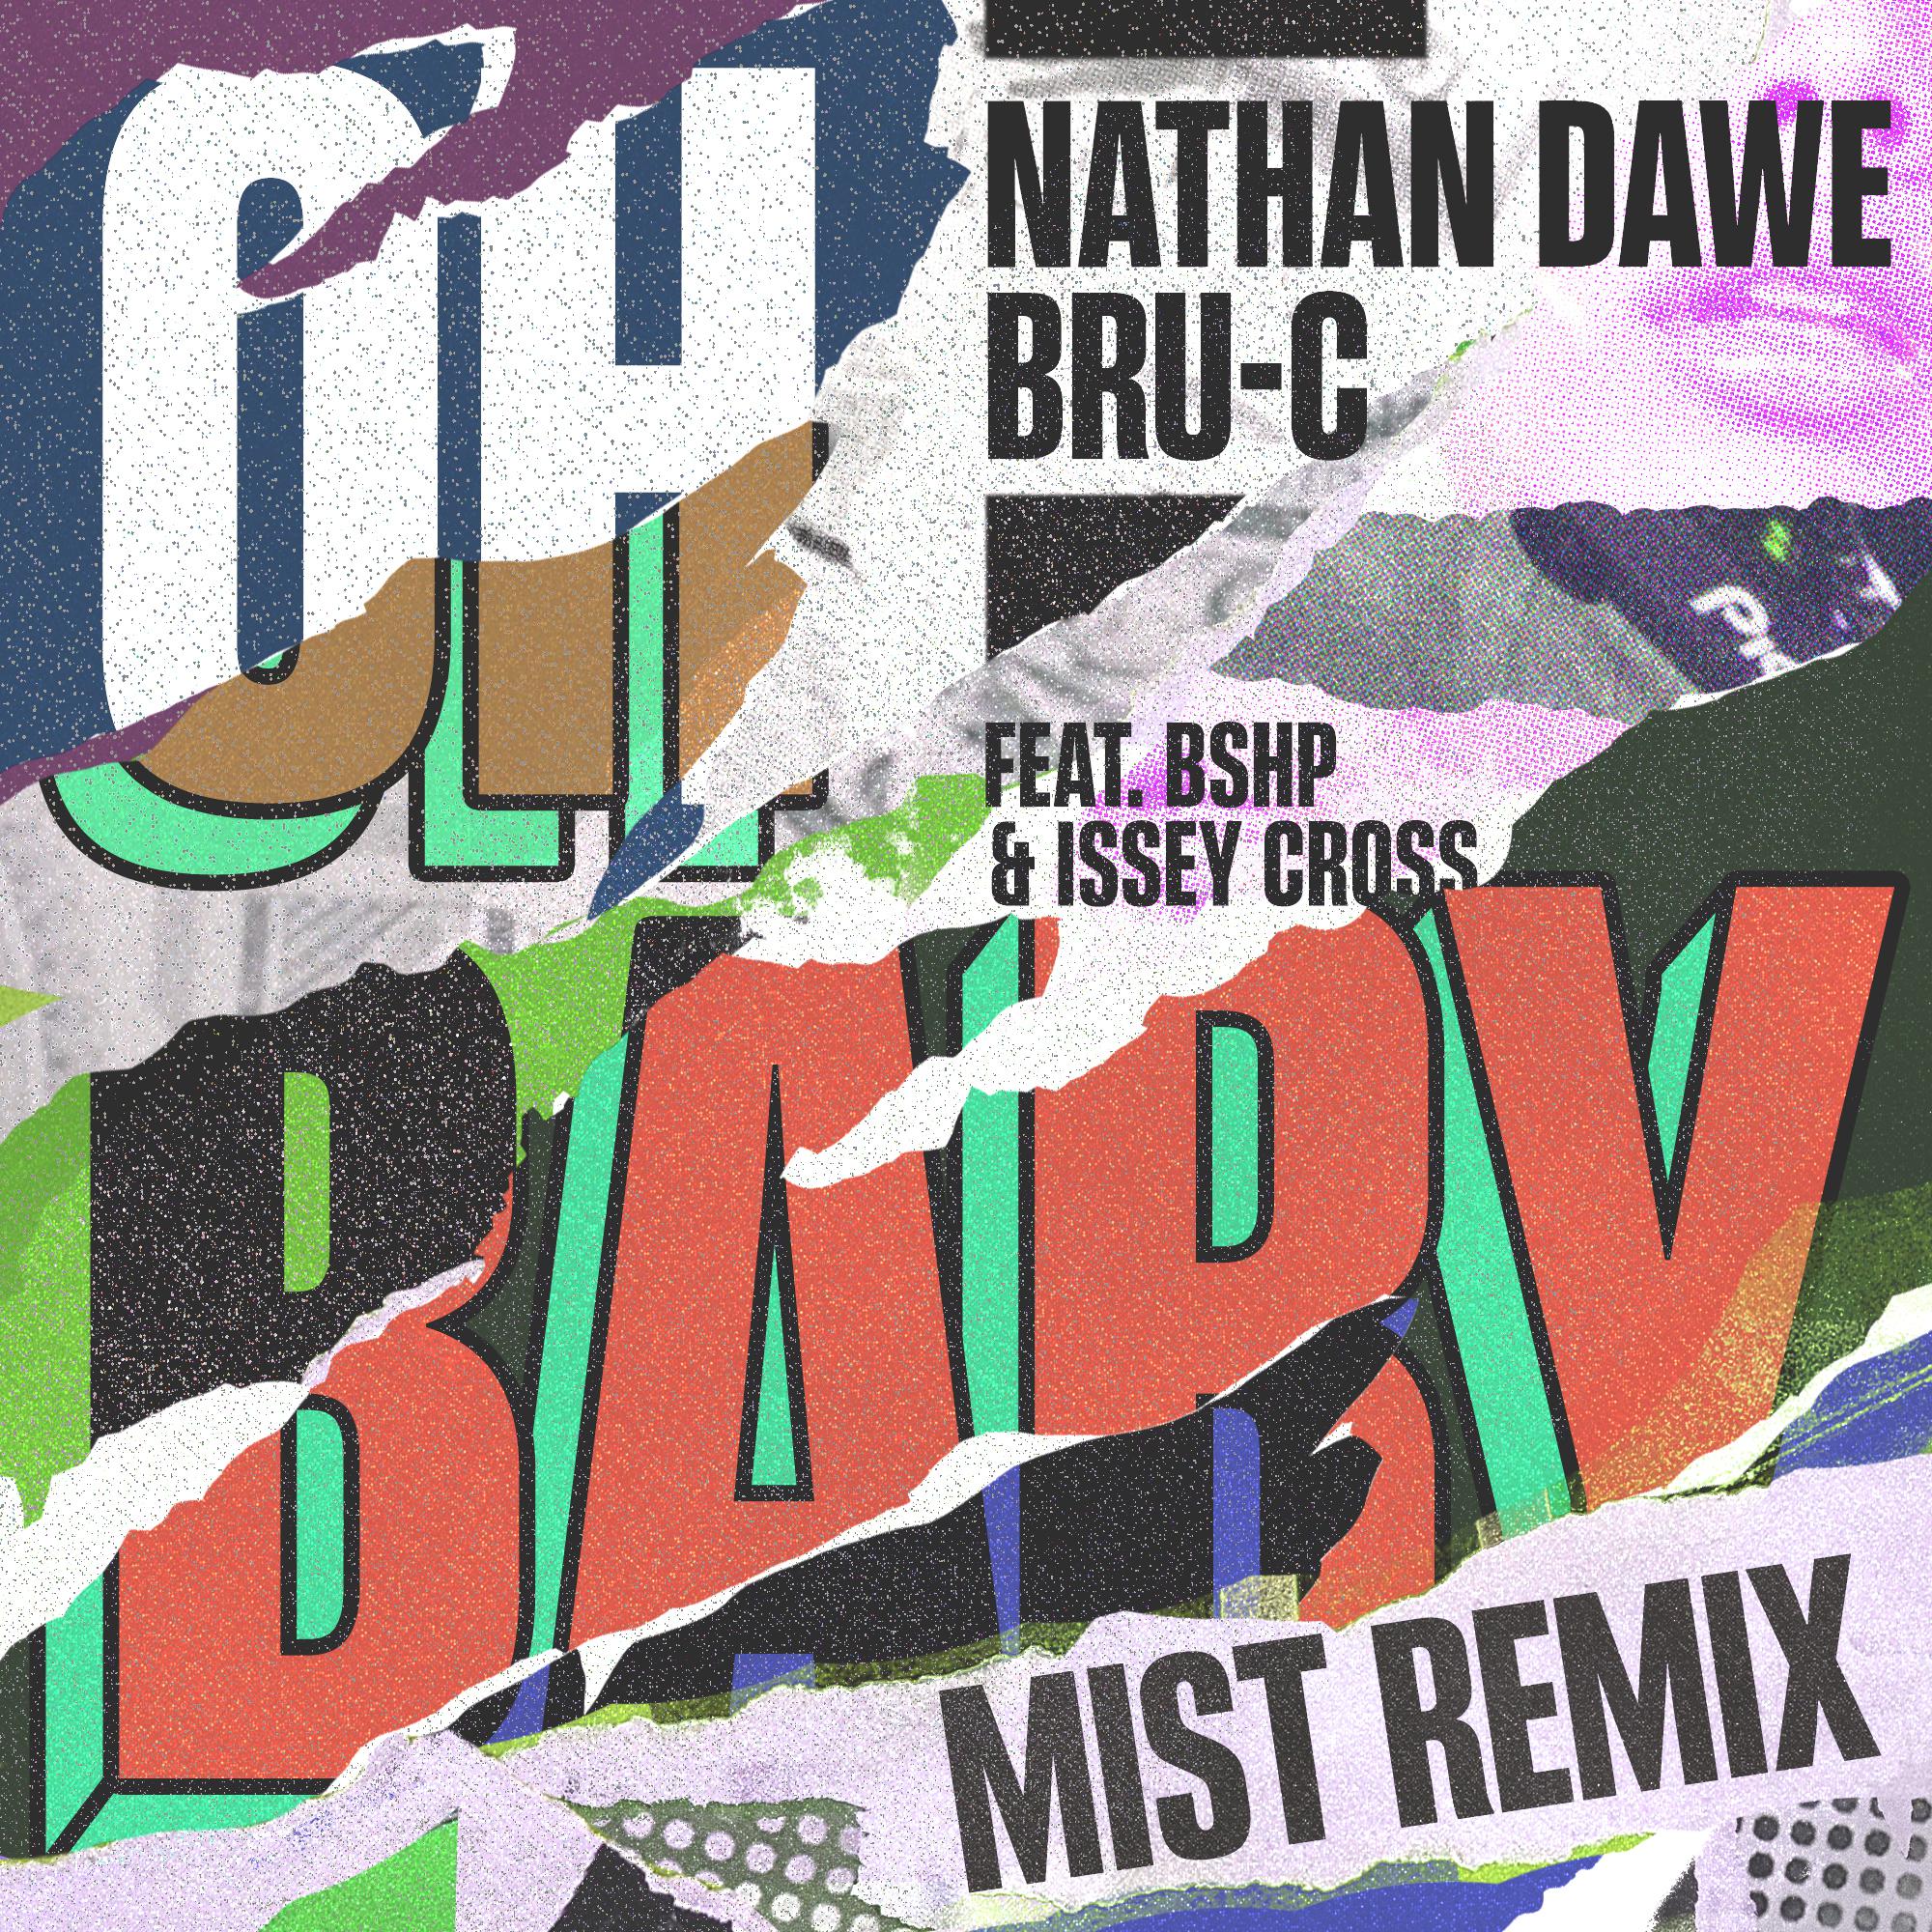 Nathan Dawe - Oh Baby (feat. bshp & Issey Cross) [MIST Remix]